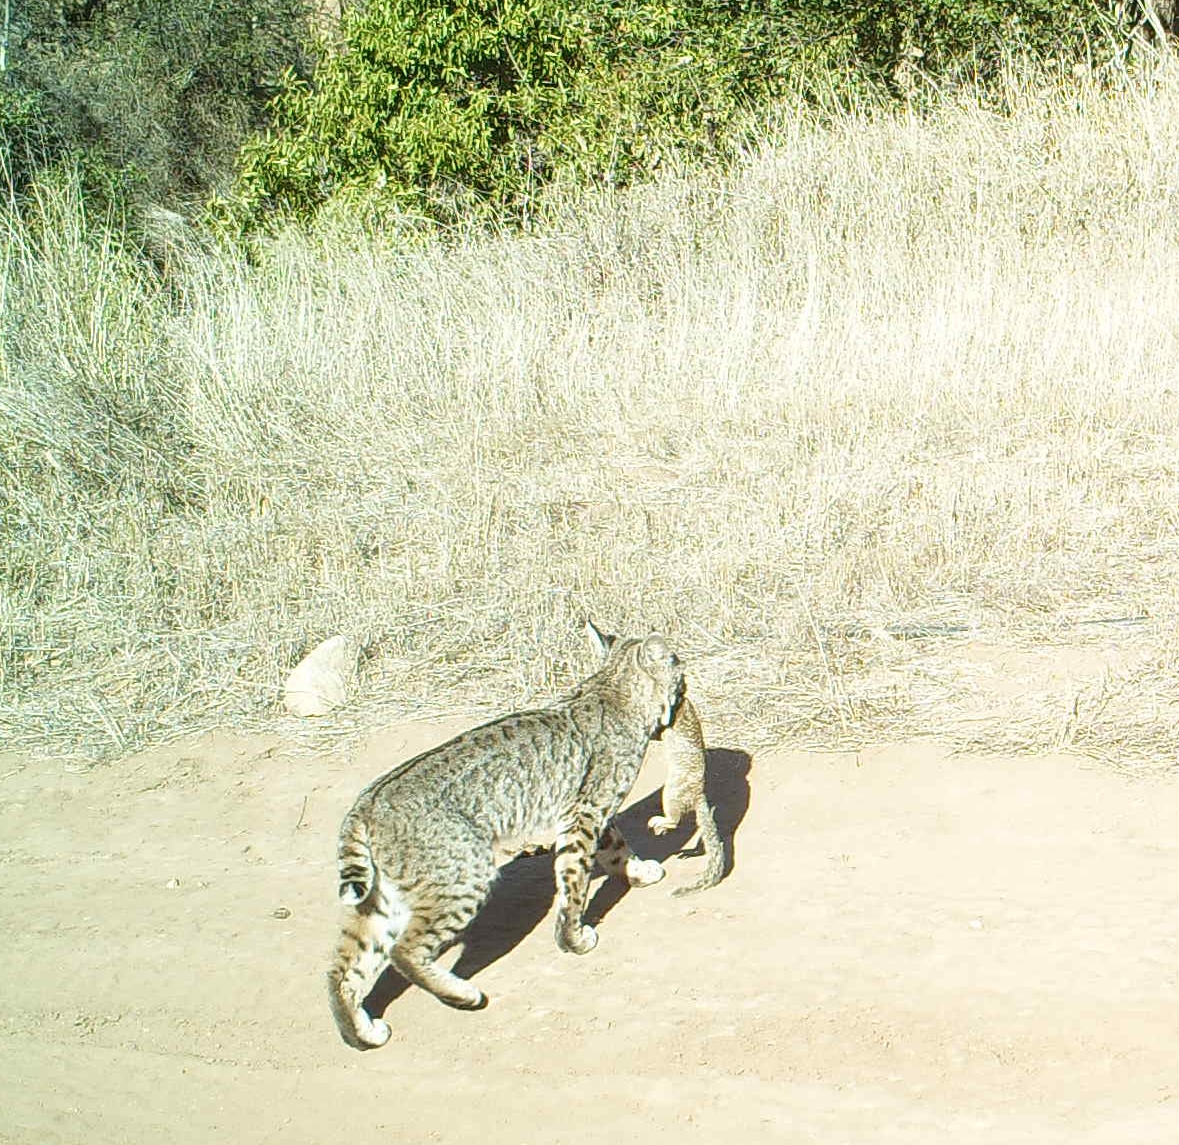 Apex predators such as the bobcats help control the ground squirrel population.